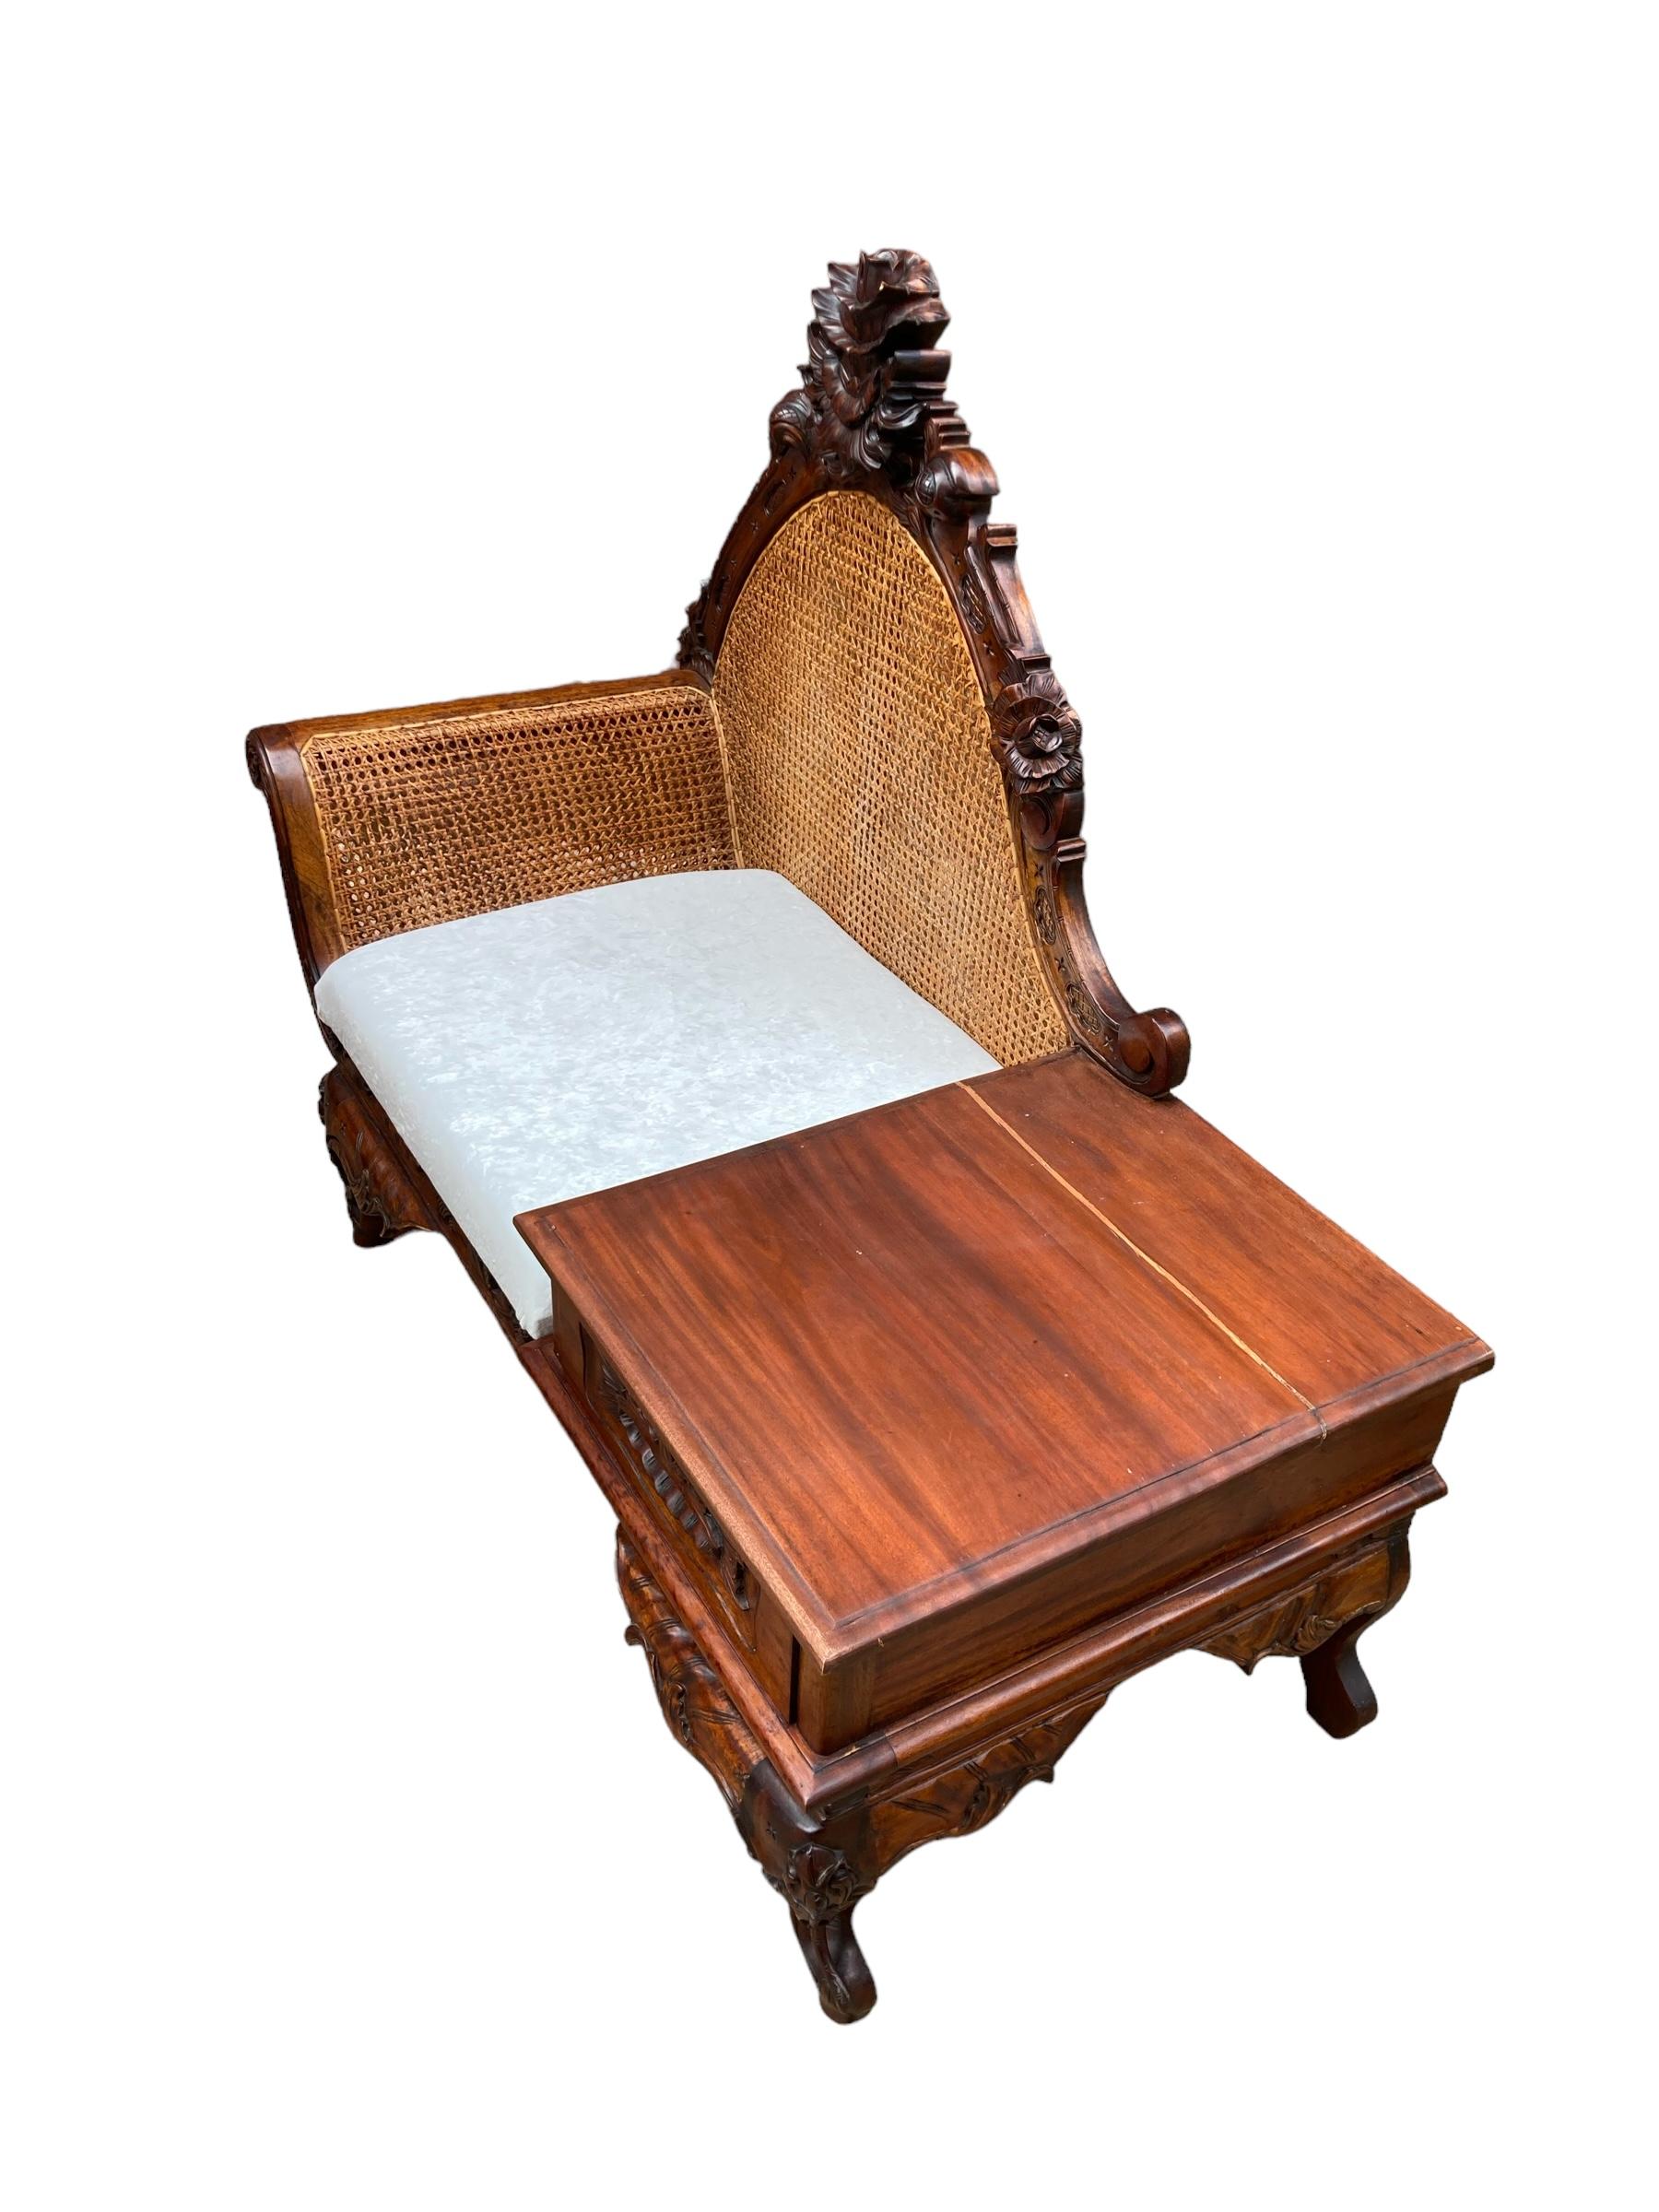 Original Hand Carved Mahogany Victorian Telephone or Gossip Bench, Bergere  In Good Condition For Sale In Bishop's Stortford, GB